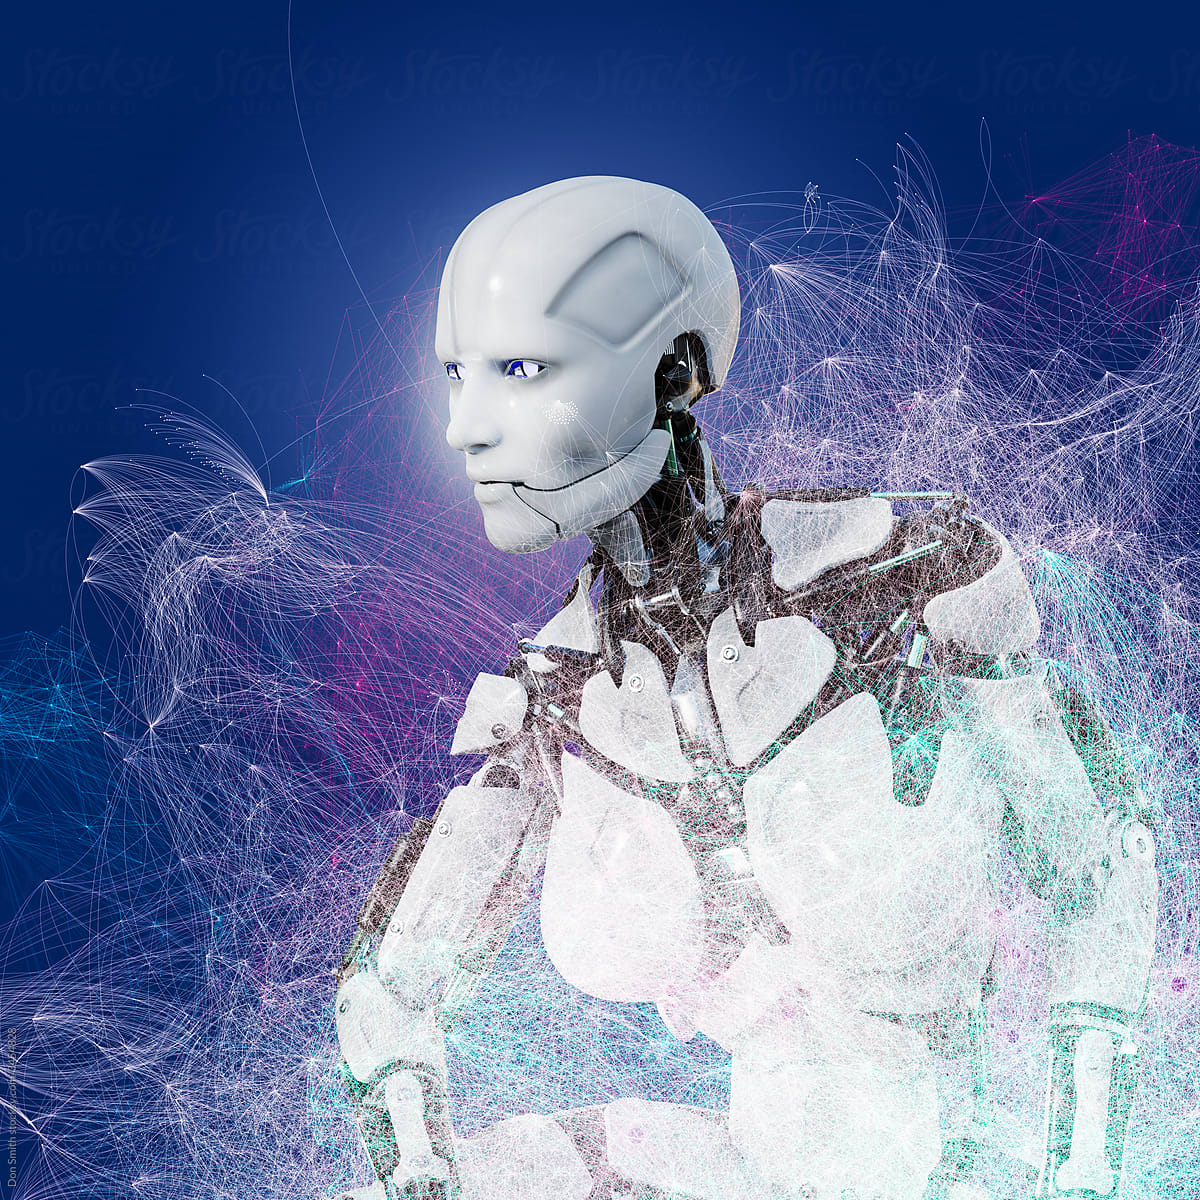 White female cyborg robot with graphical pattern overlay